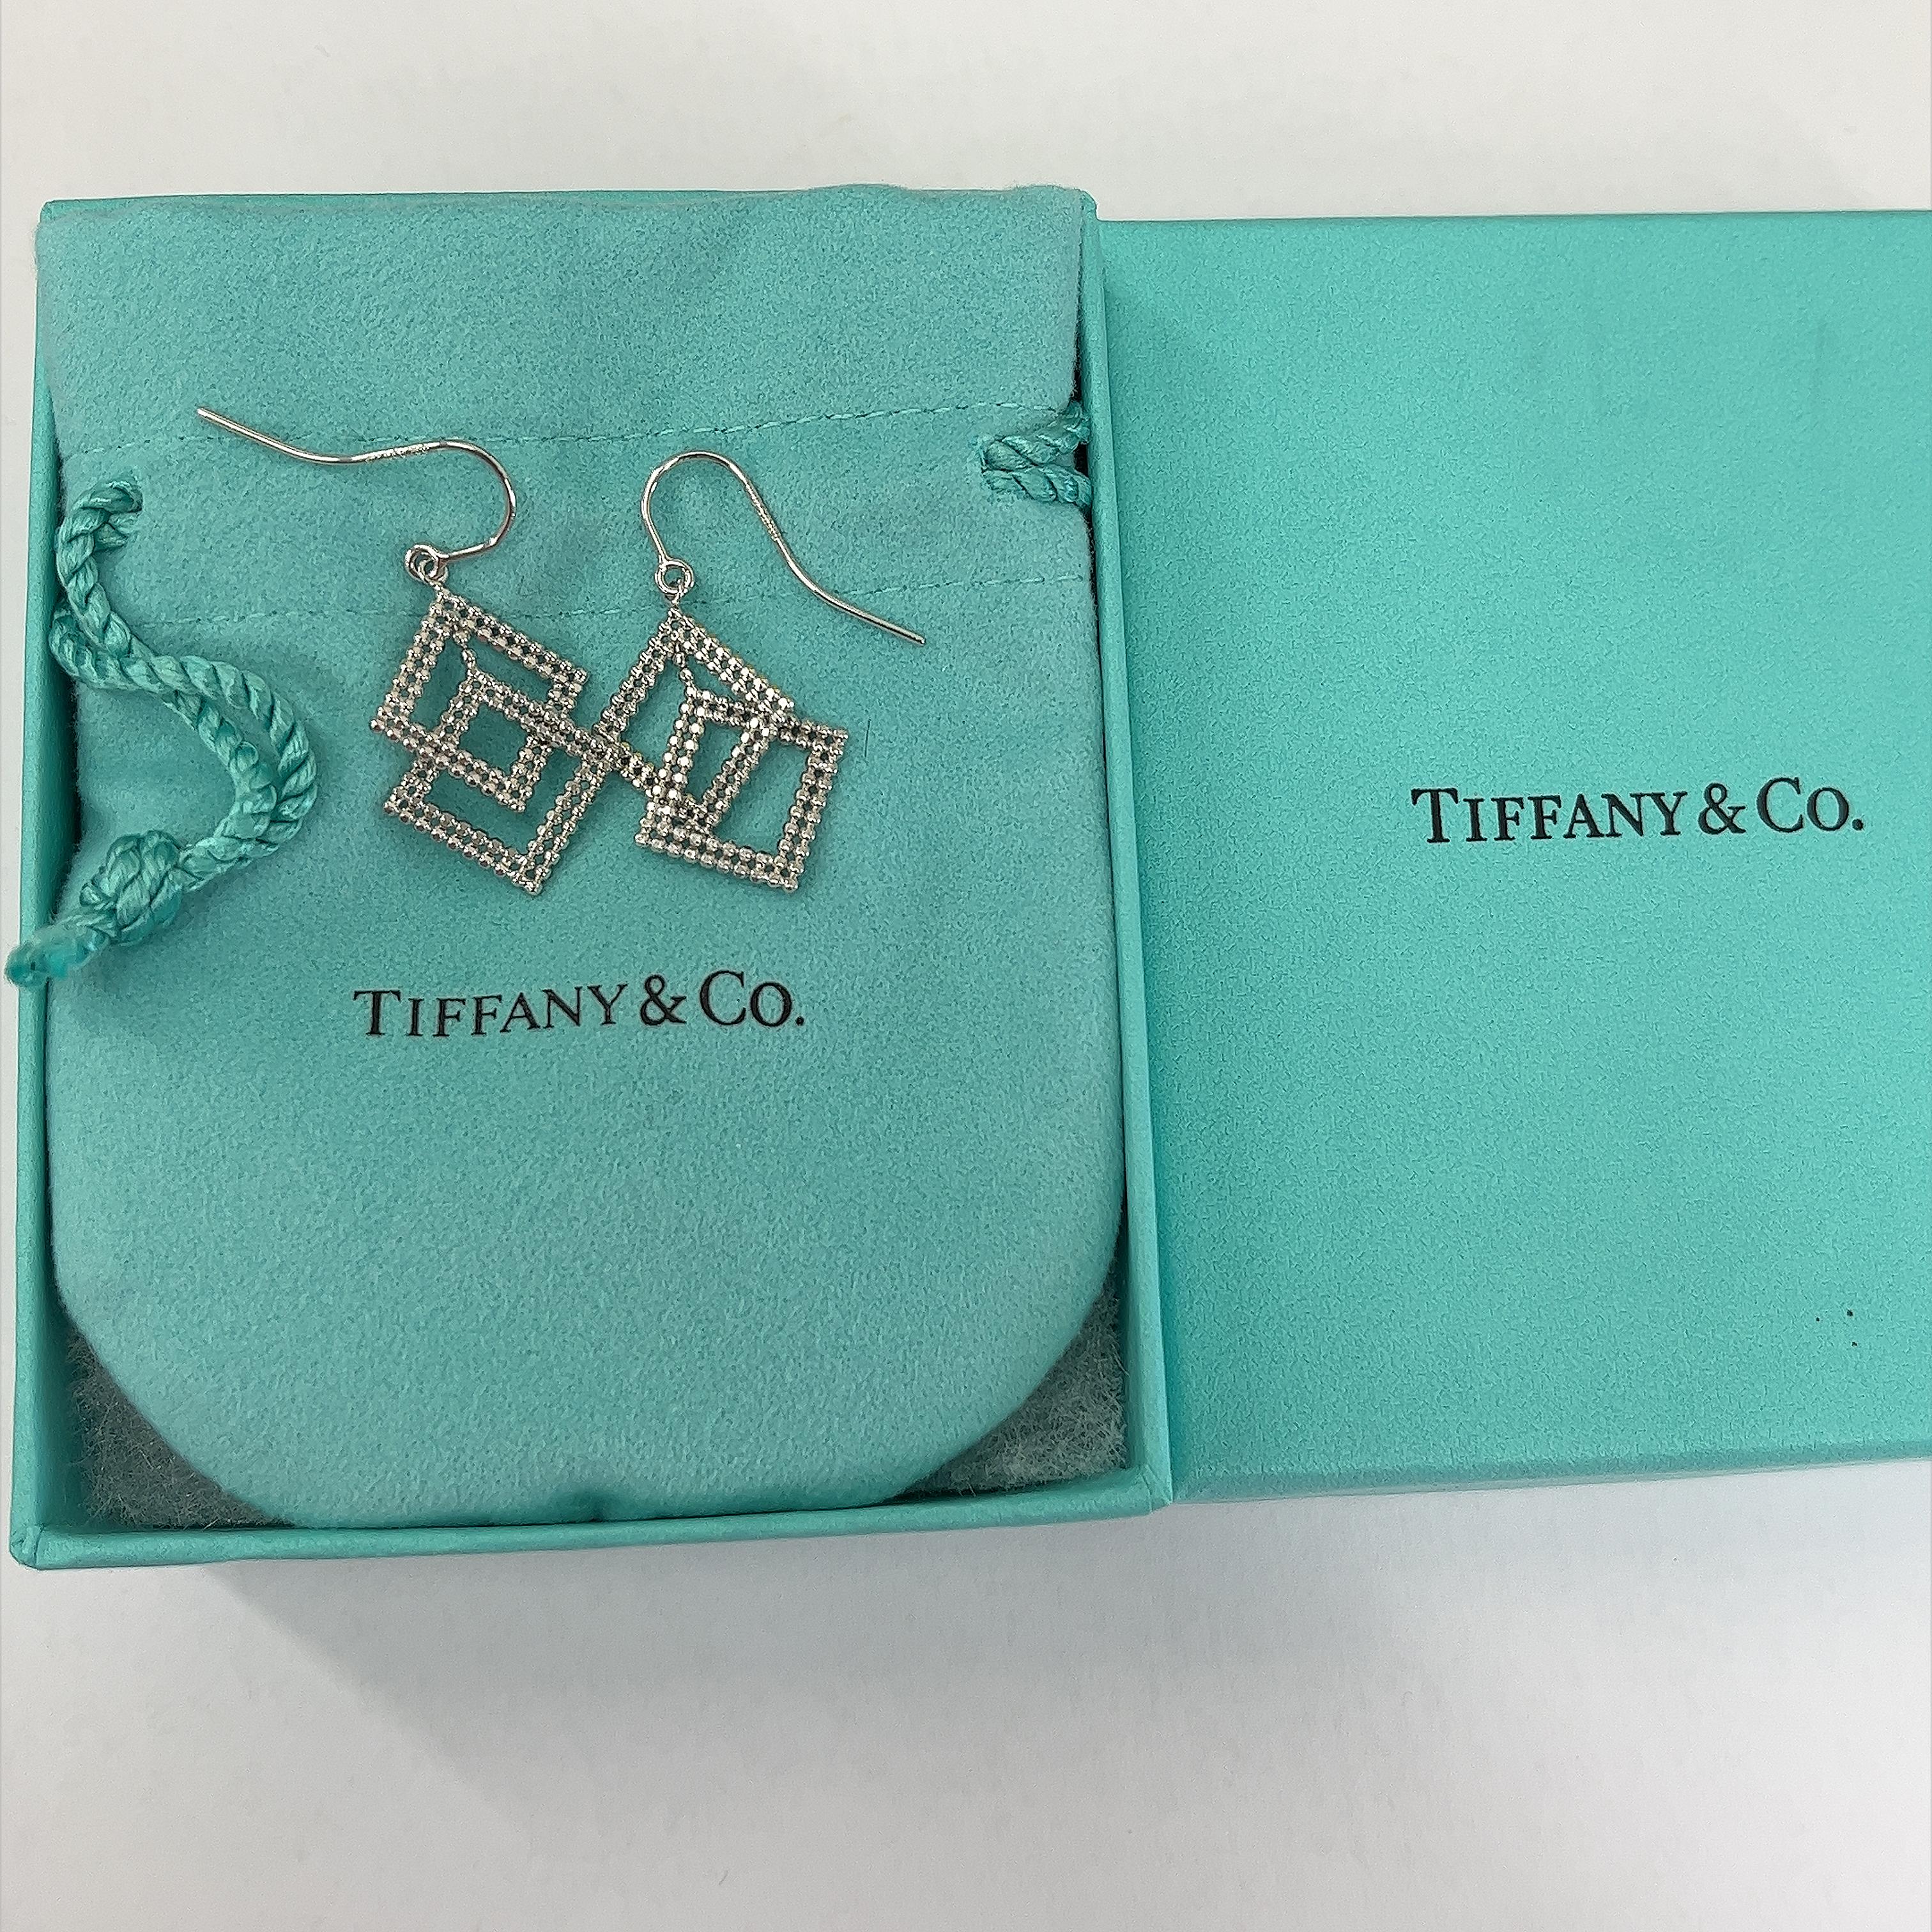 Tiffany & Co. Earrings square shape set in 18ct White Gold For Sale 3